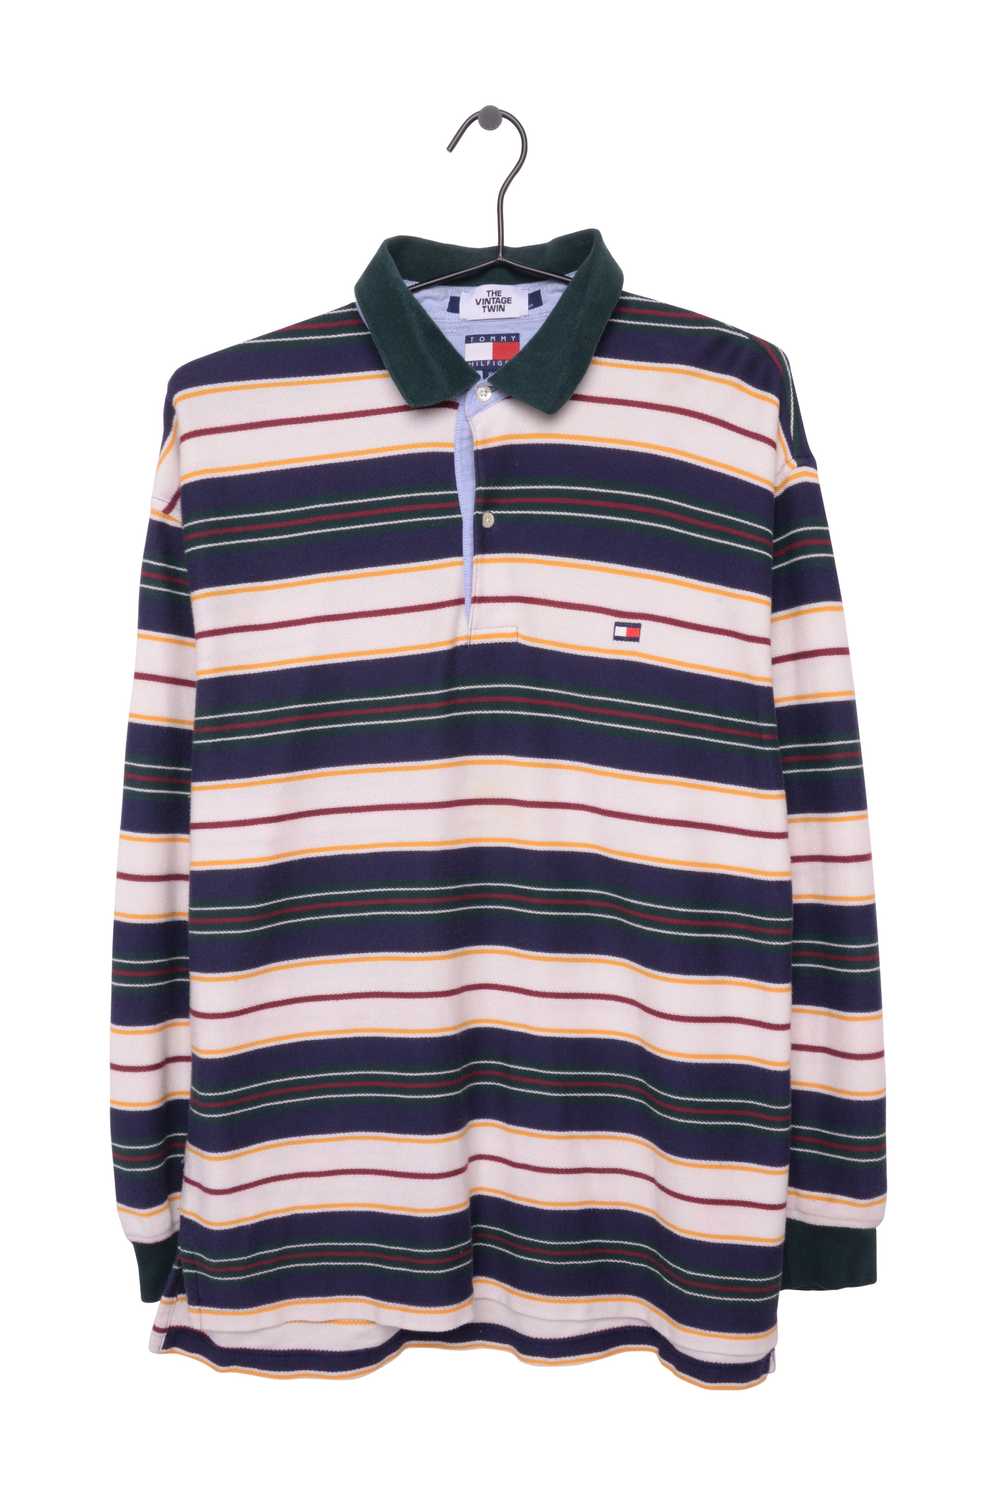 Tommy Hilfiger Rugby Shirt - image 1